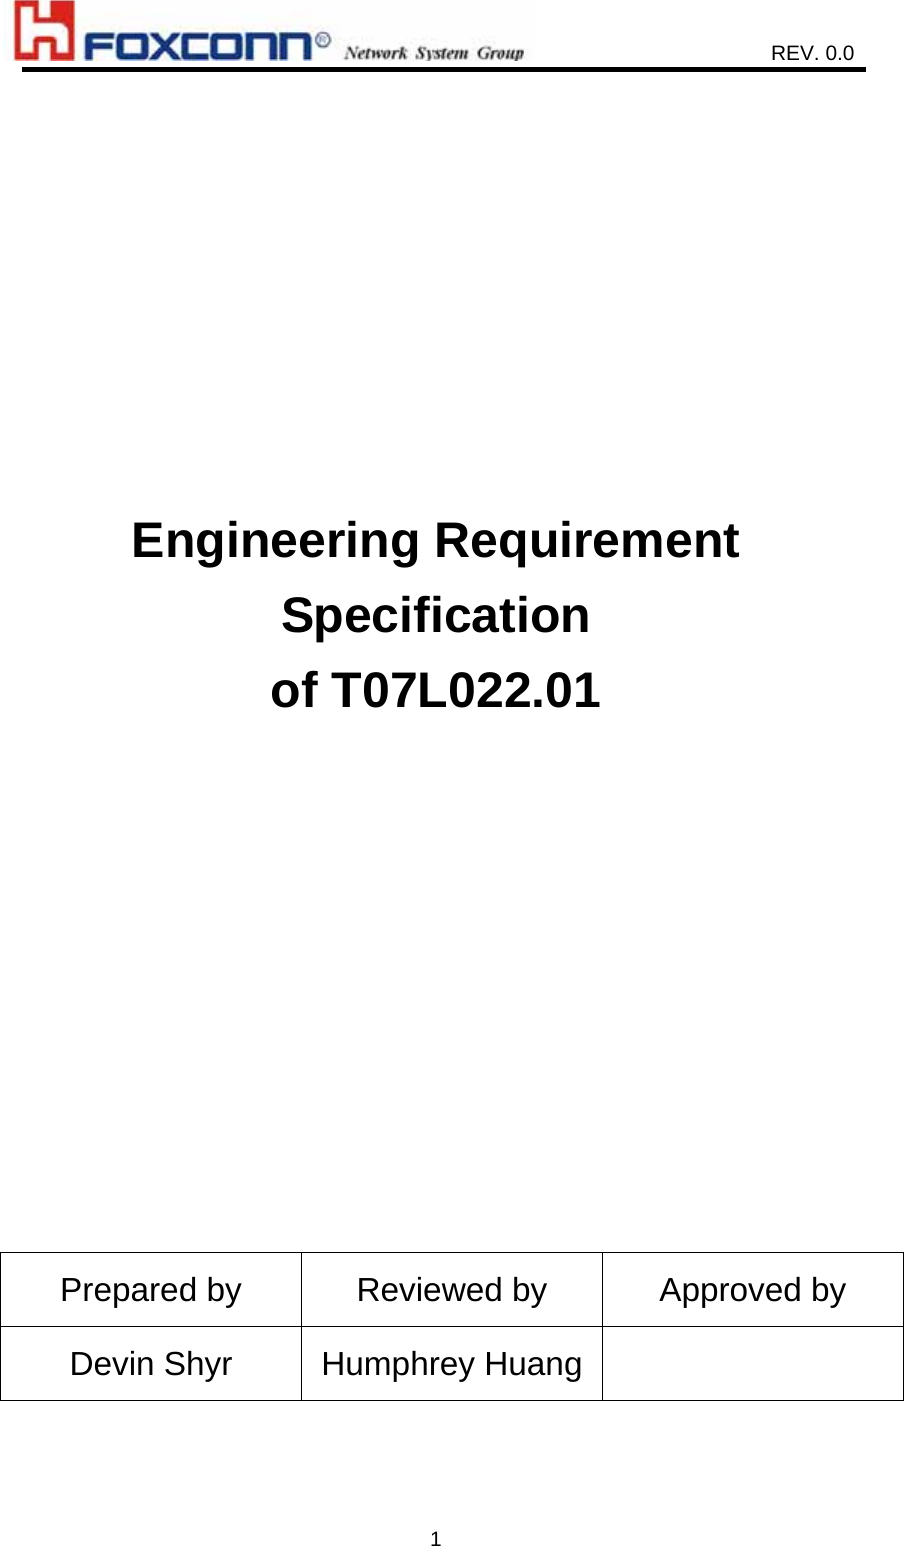                    REV. 0.0   1           Engineering Requirement Specification  of T07L022.01        Prepared by  Reviewed by  Approved by Devin Shyr  Humphrey Huang    